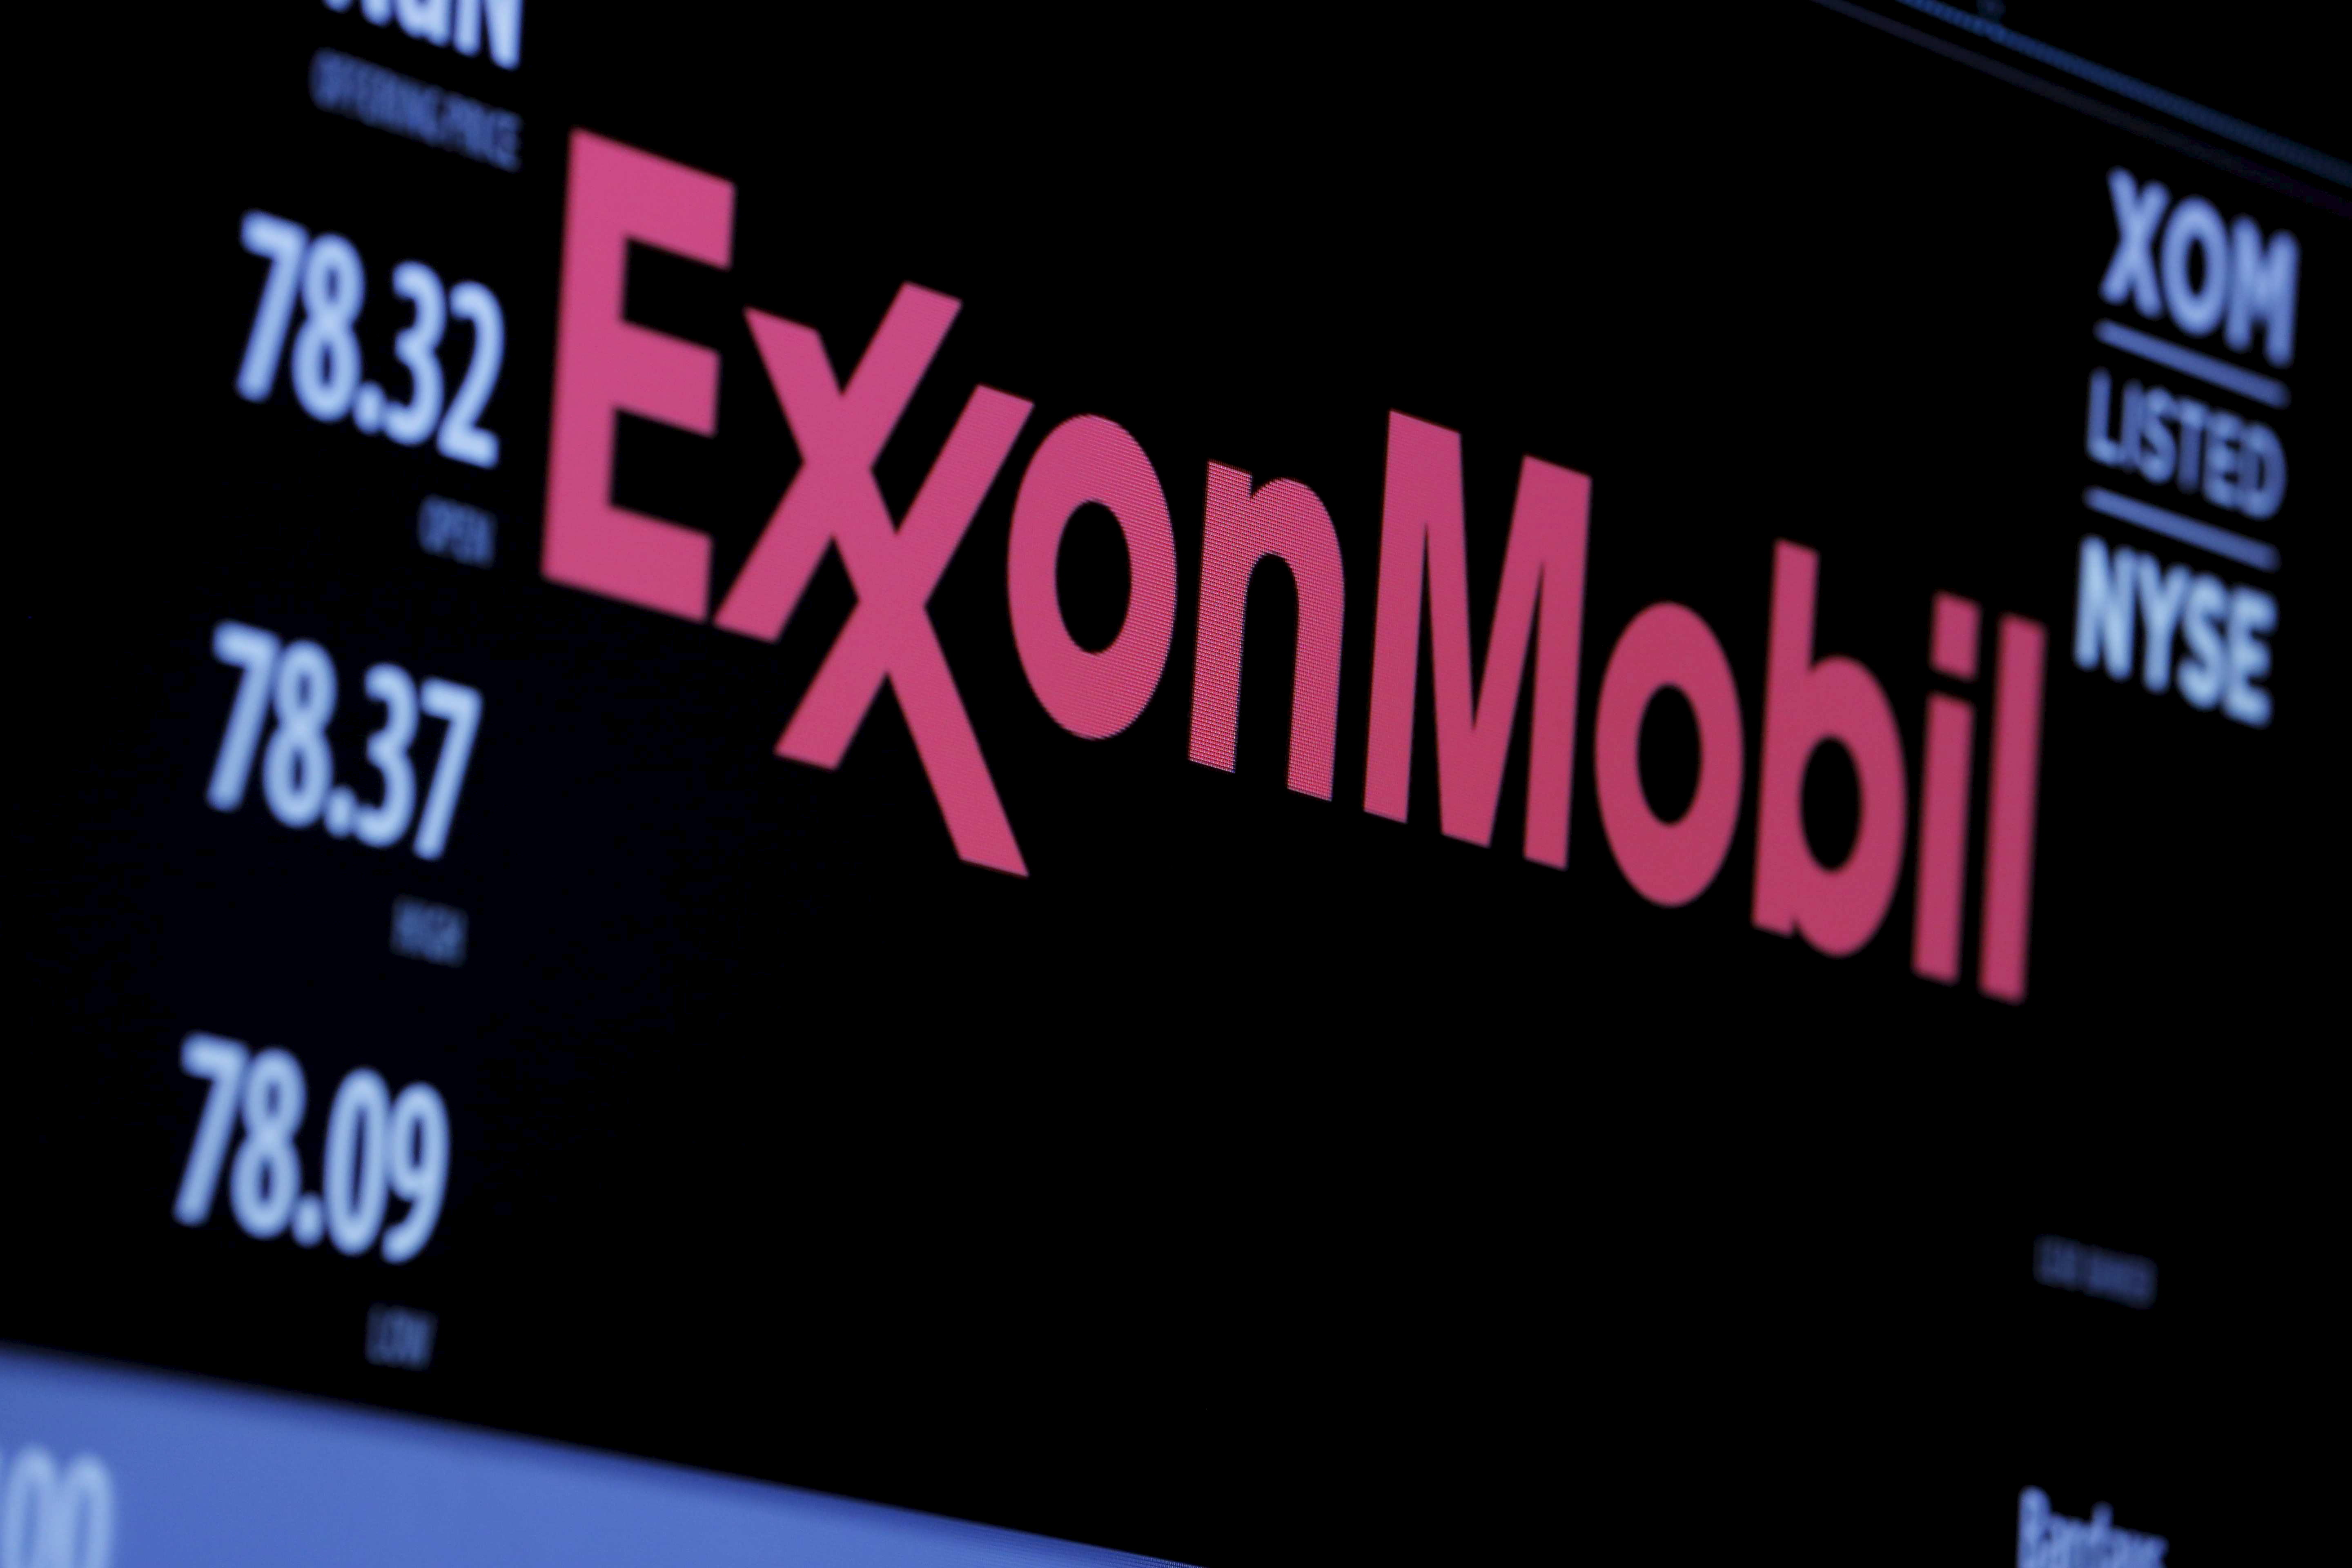 The logo of Exxon Mobil Corporation is shown on a monitor above the floor of the New York Stock Exchange in New York, December 30, 2015. Standard & Poor's Ratings Services said on April 26, 2016, it had cut Exxon Mobil Corp's corporate credit rating to 